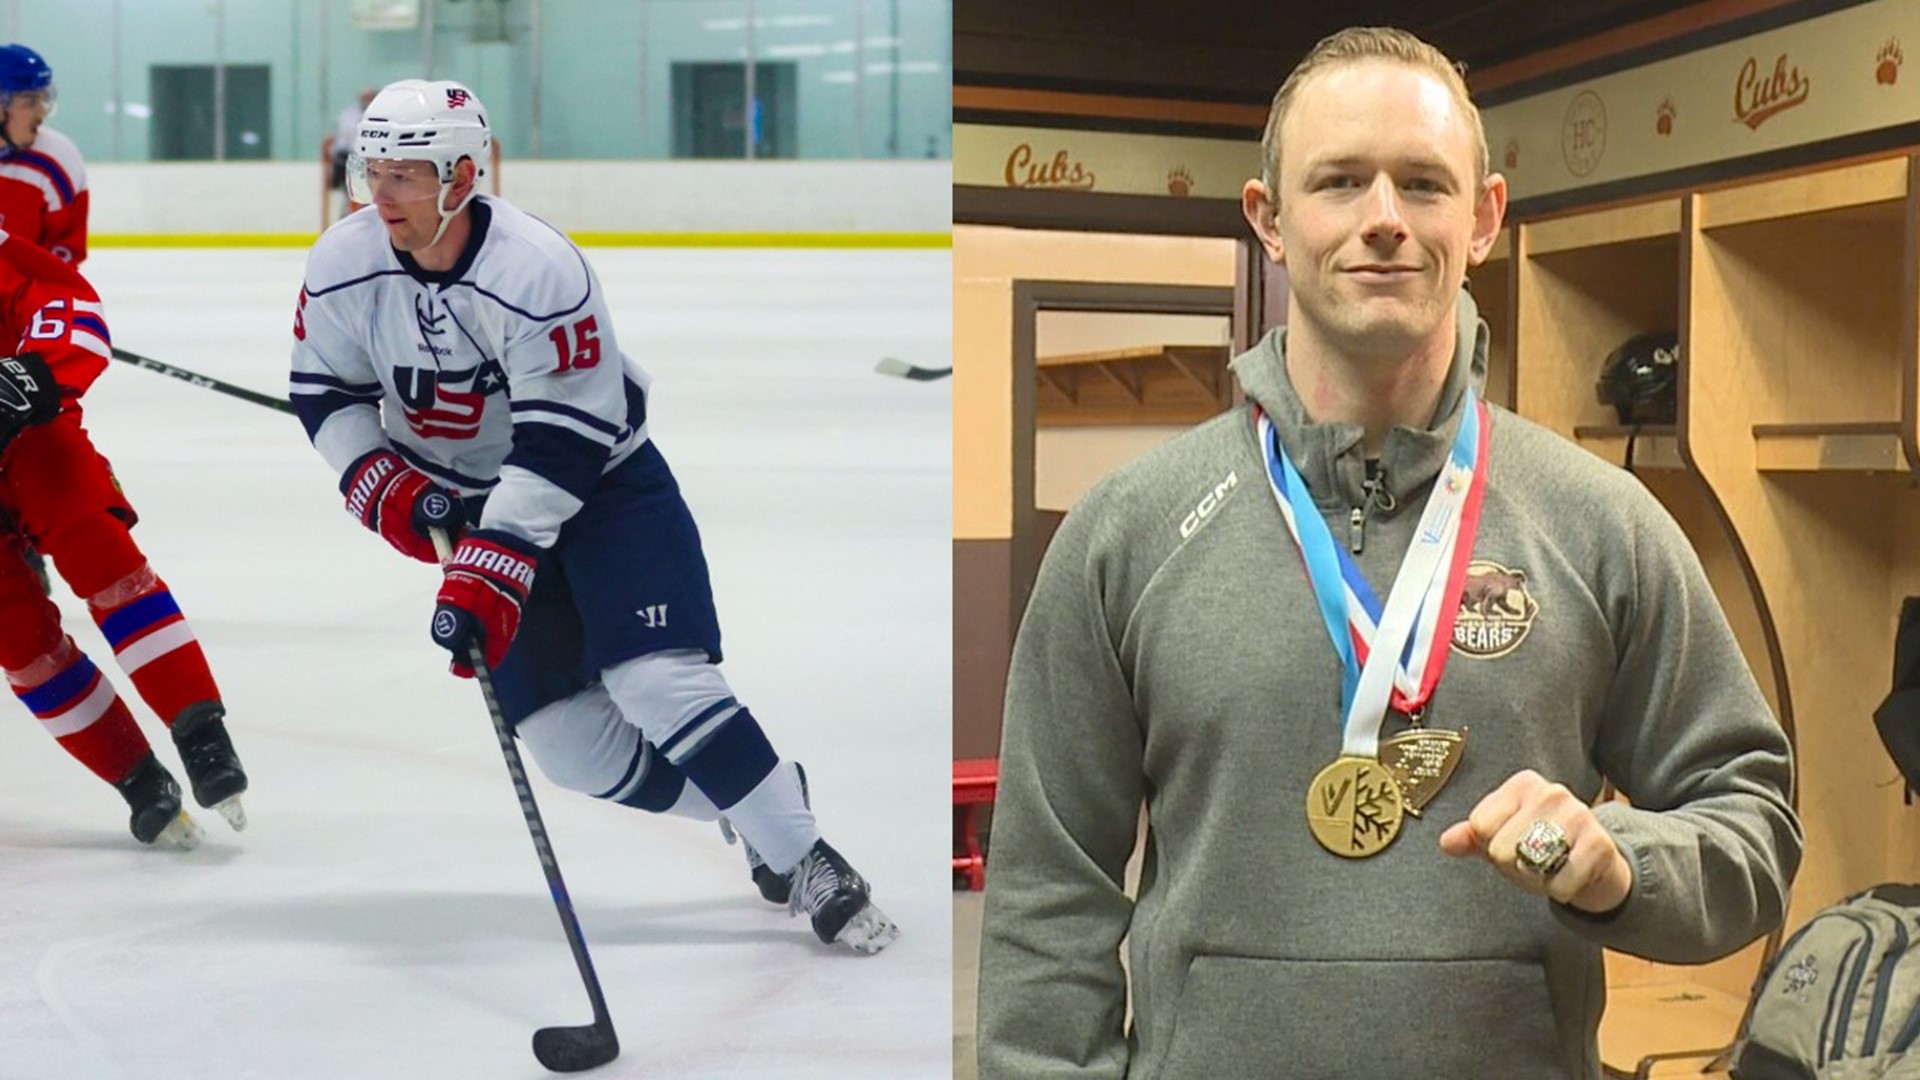 Max Finley, who lost his hearing at the age of five, won silver at the Jeff Sauer International Deaf Hockey Series all while helping the Hershey Bears.